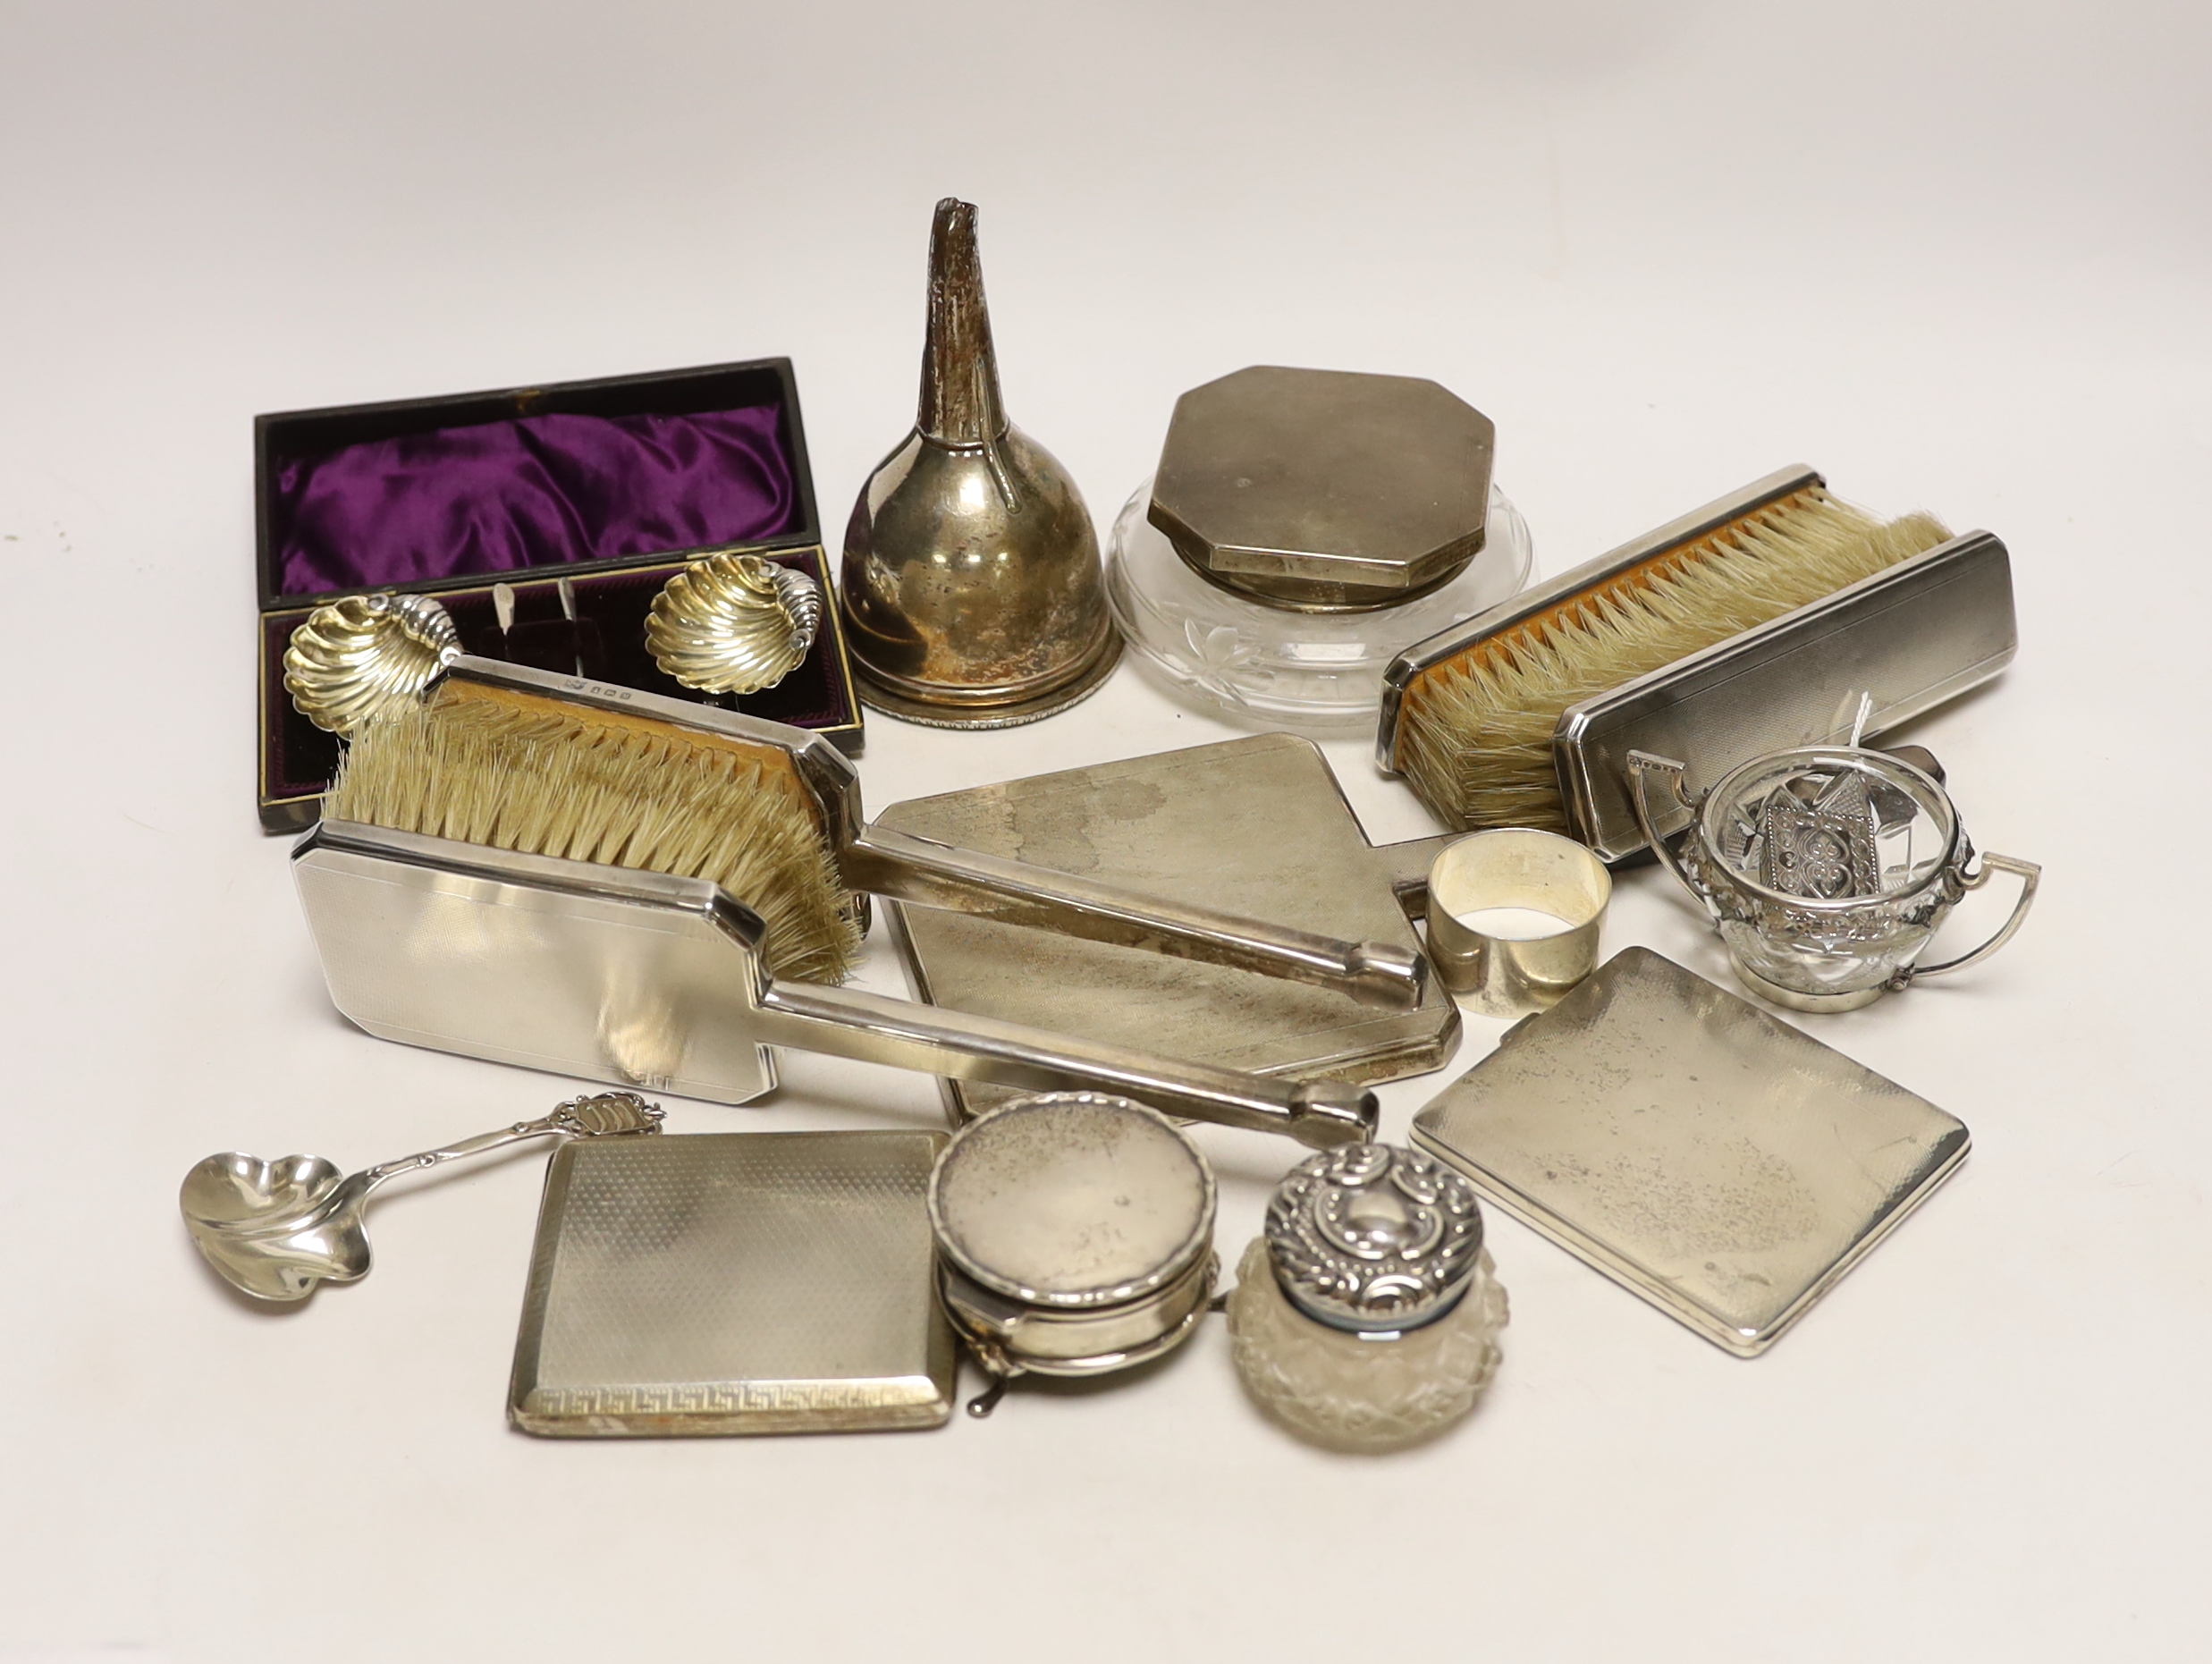 A group of assorted small silver, including a powder jar, trinket box, cigarette case, mirror and brush set etc. and a plated wine funnel.